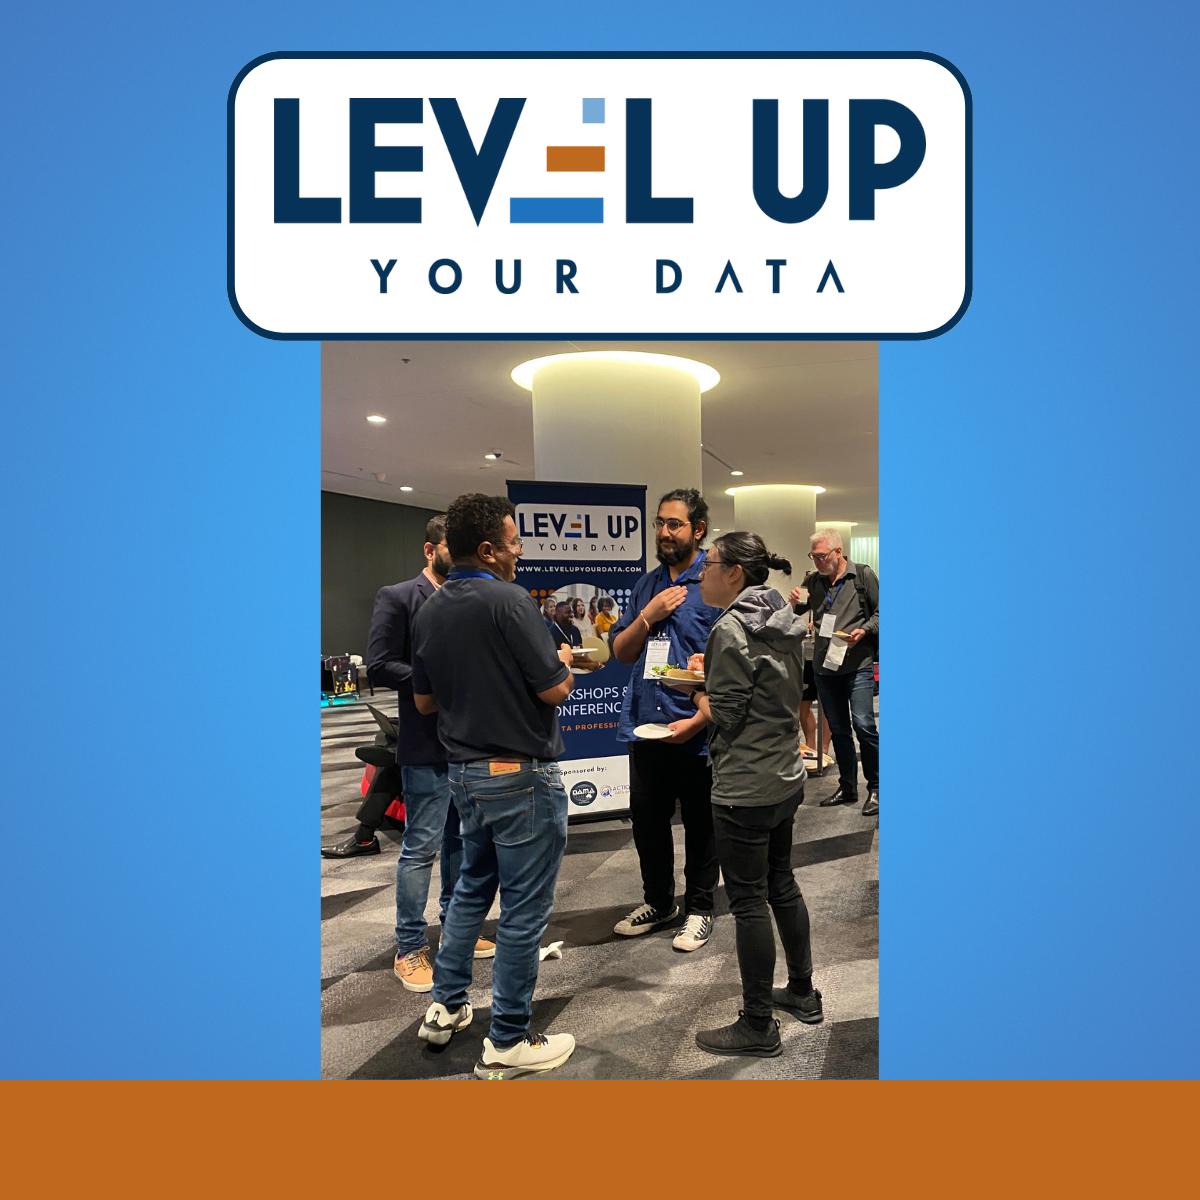 Level Up Your Data Conference